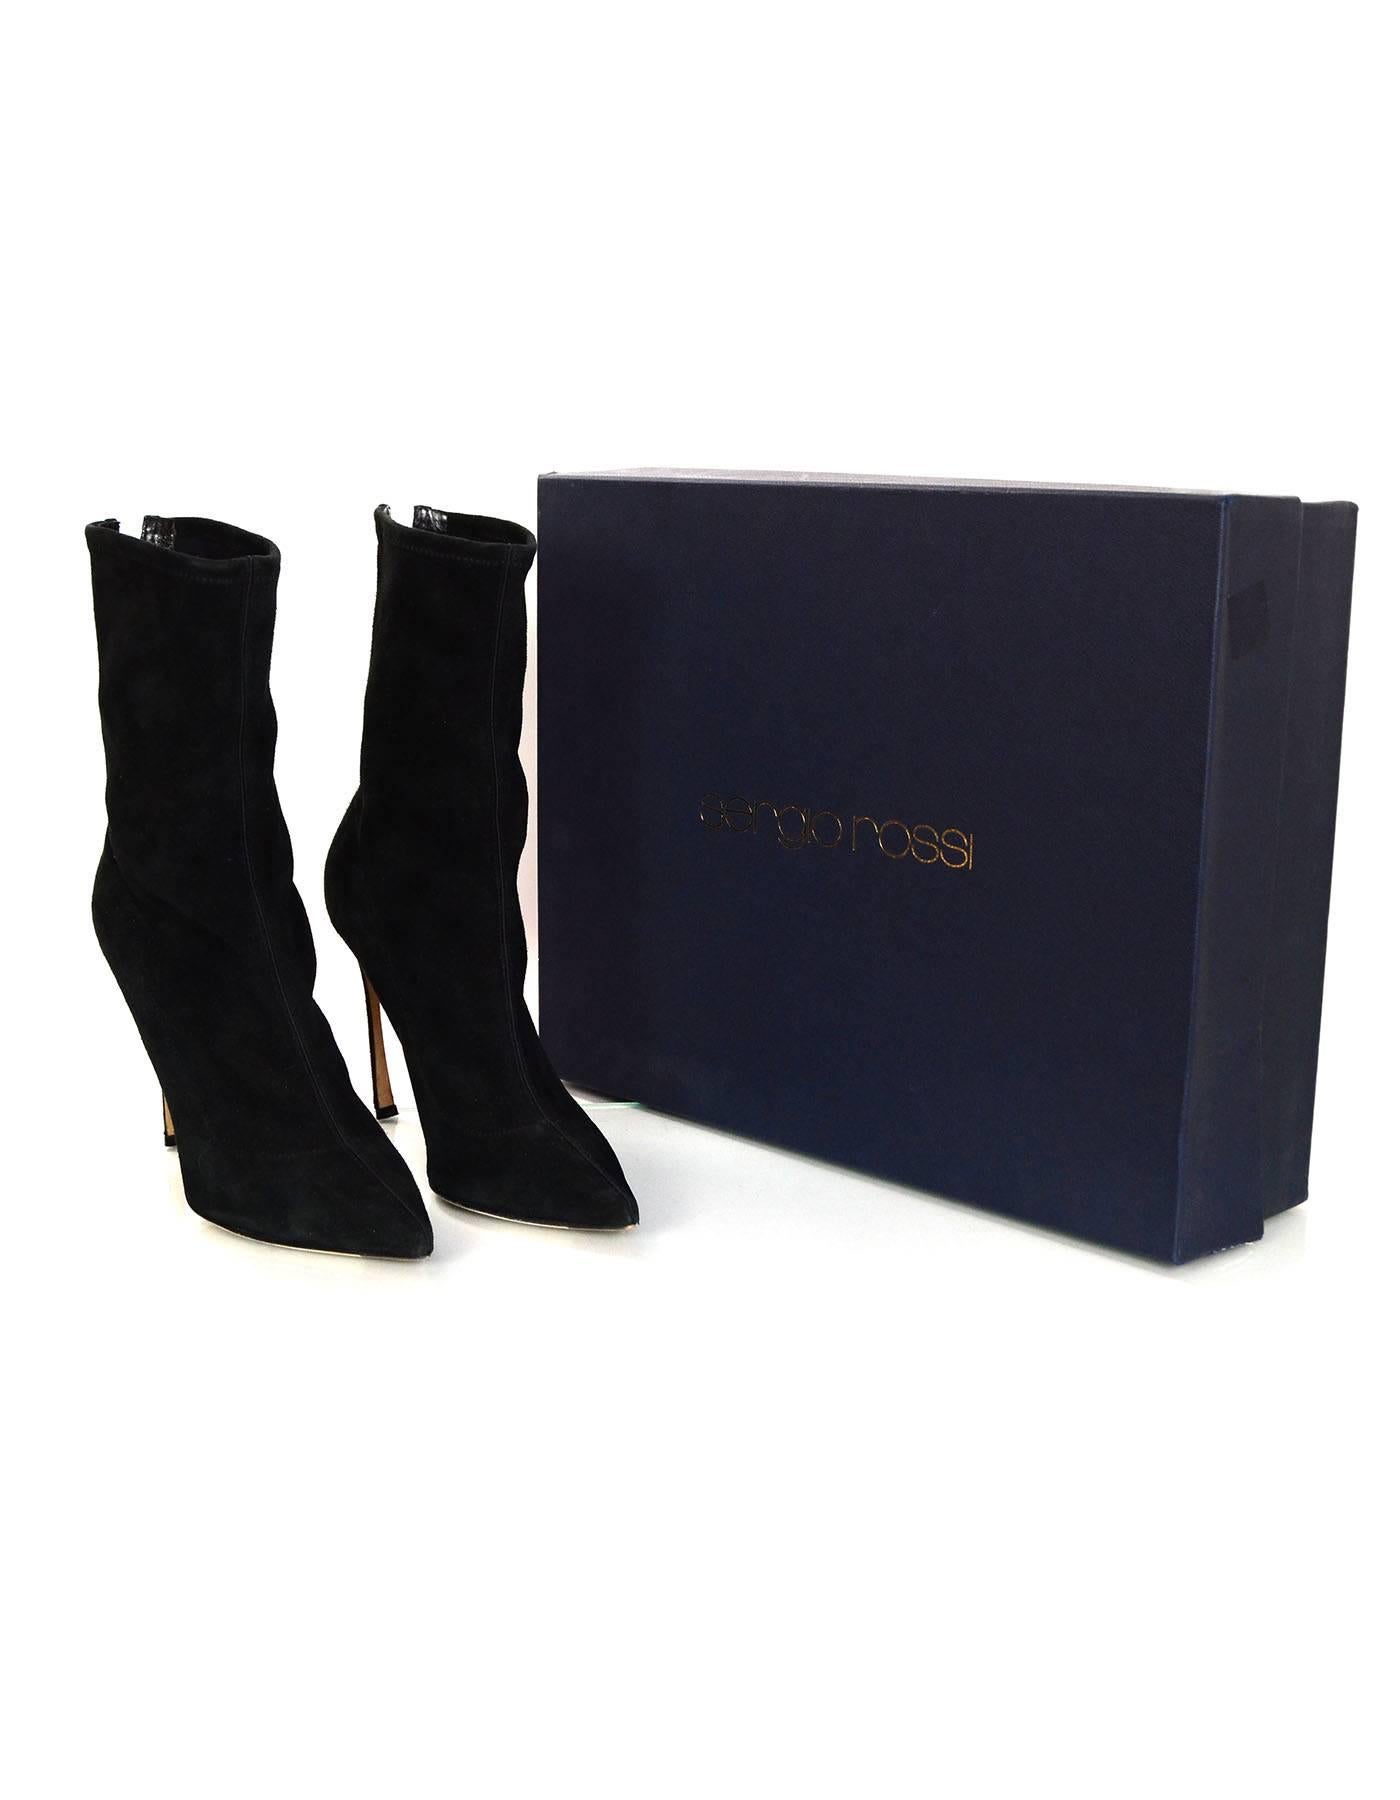 Sergio Rossi Black Suede Point Toe Boots w/ Back Crystal Detail sz 38.5 rt $1460 3